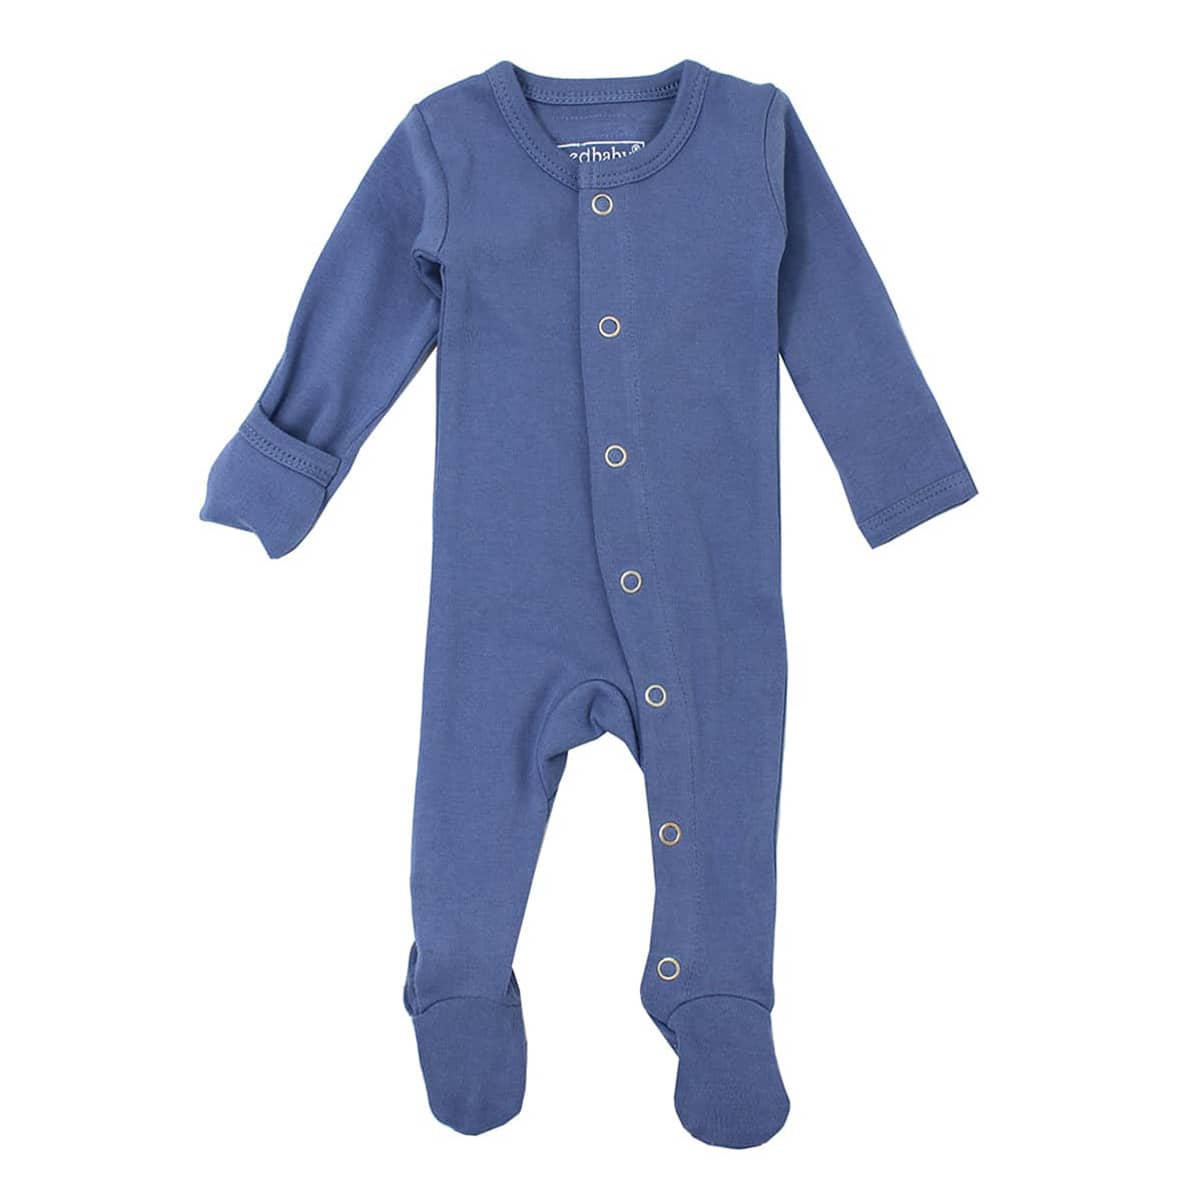 L'ovedbaby Organic Gl'oved Footed Overall - Slate